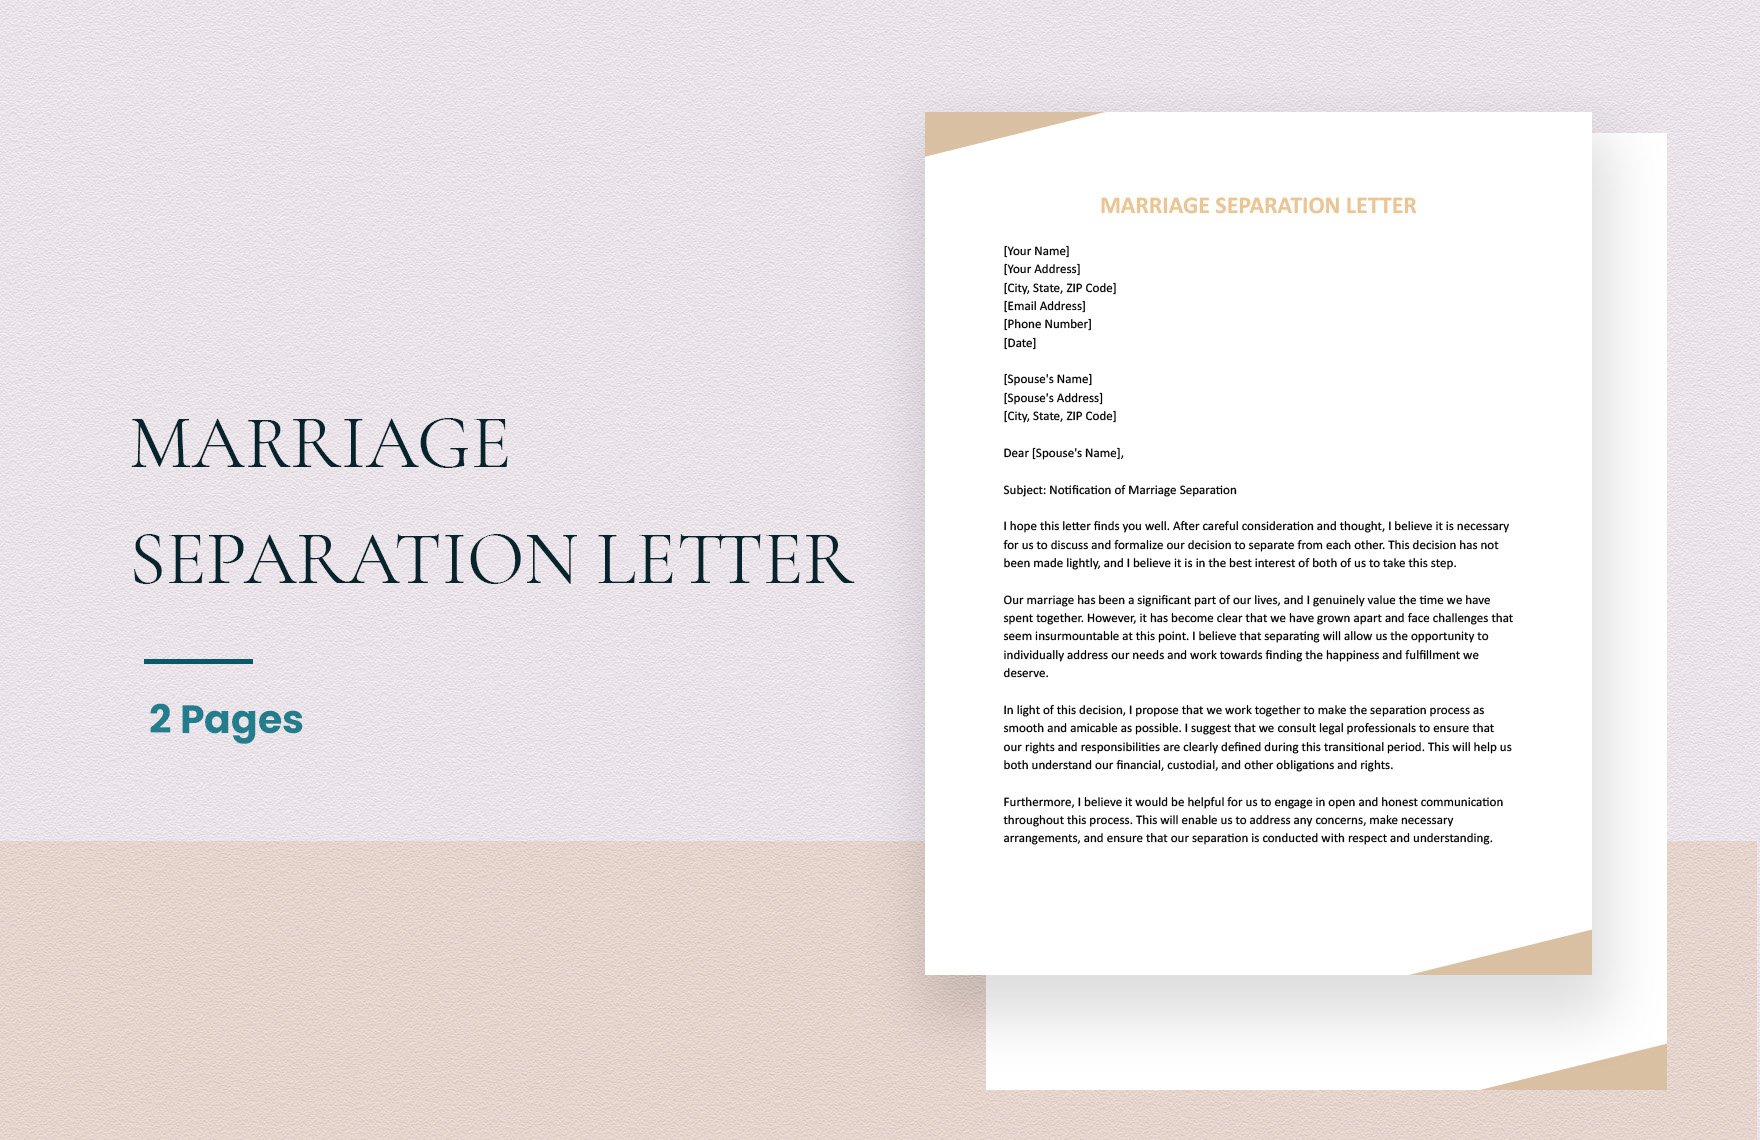 Marriage Separation Letter in Word, Google Docs, Apple Pages